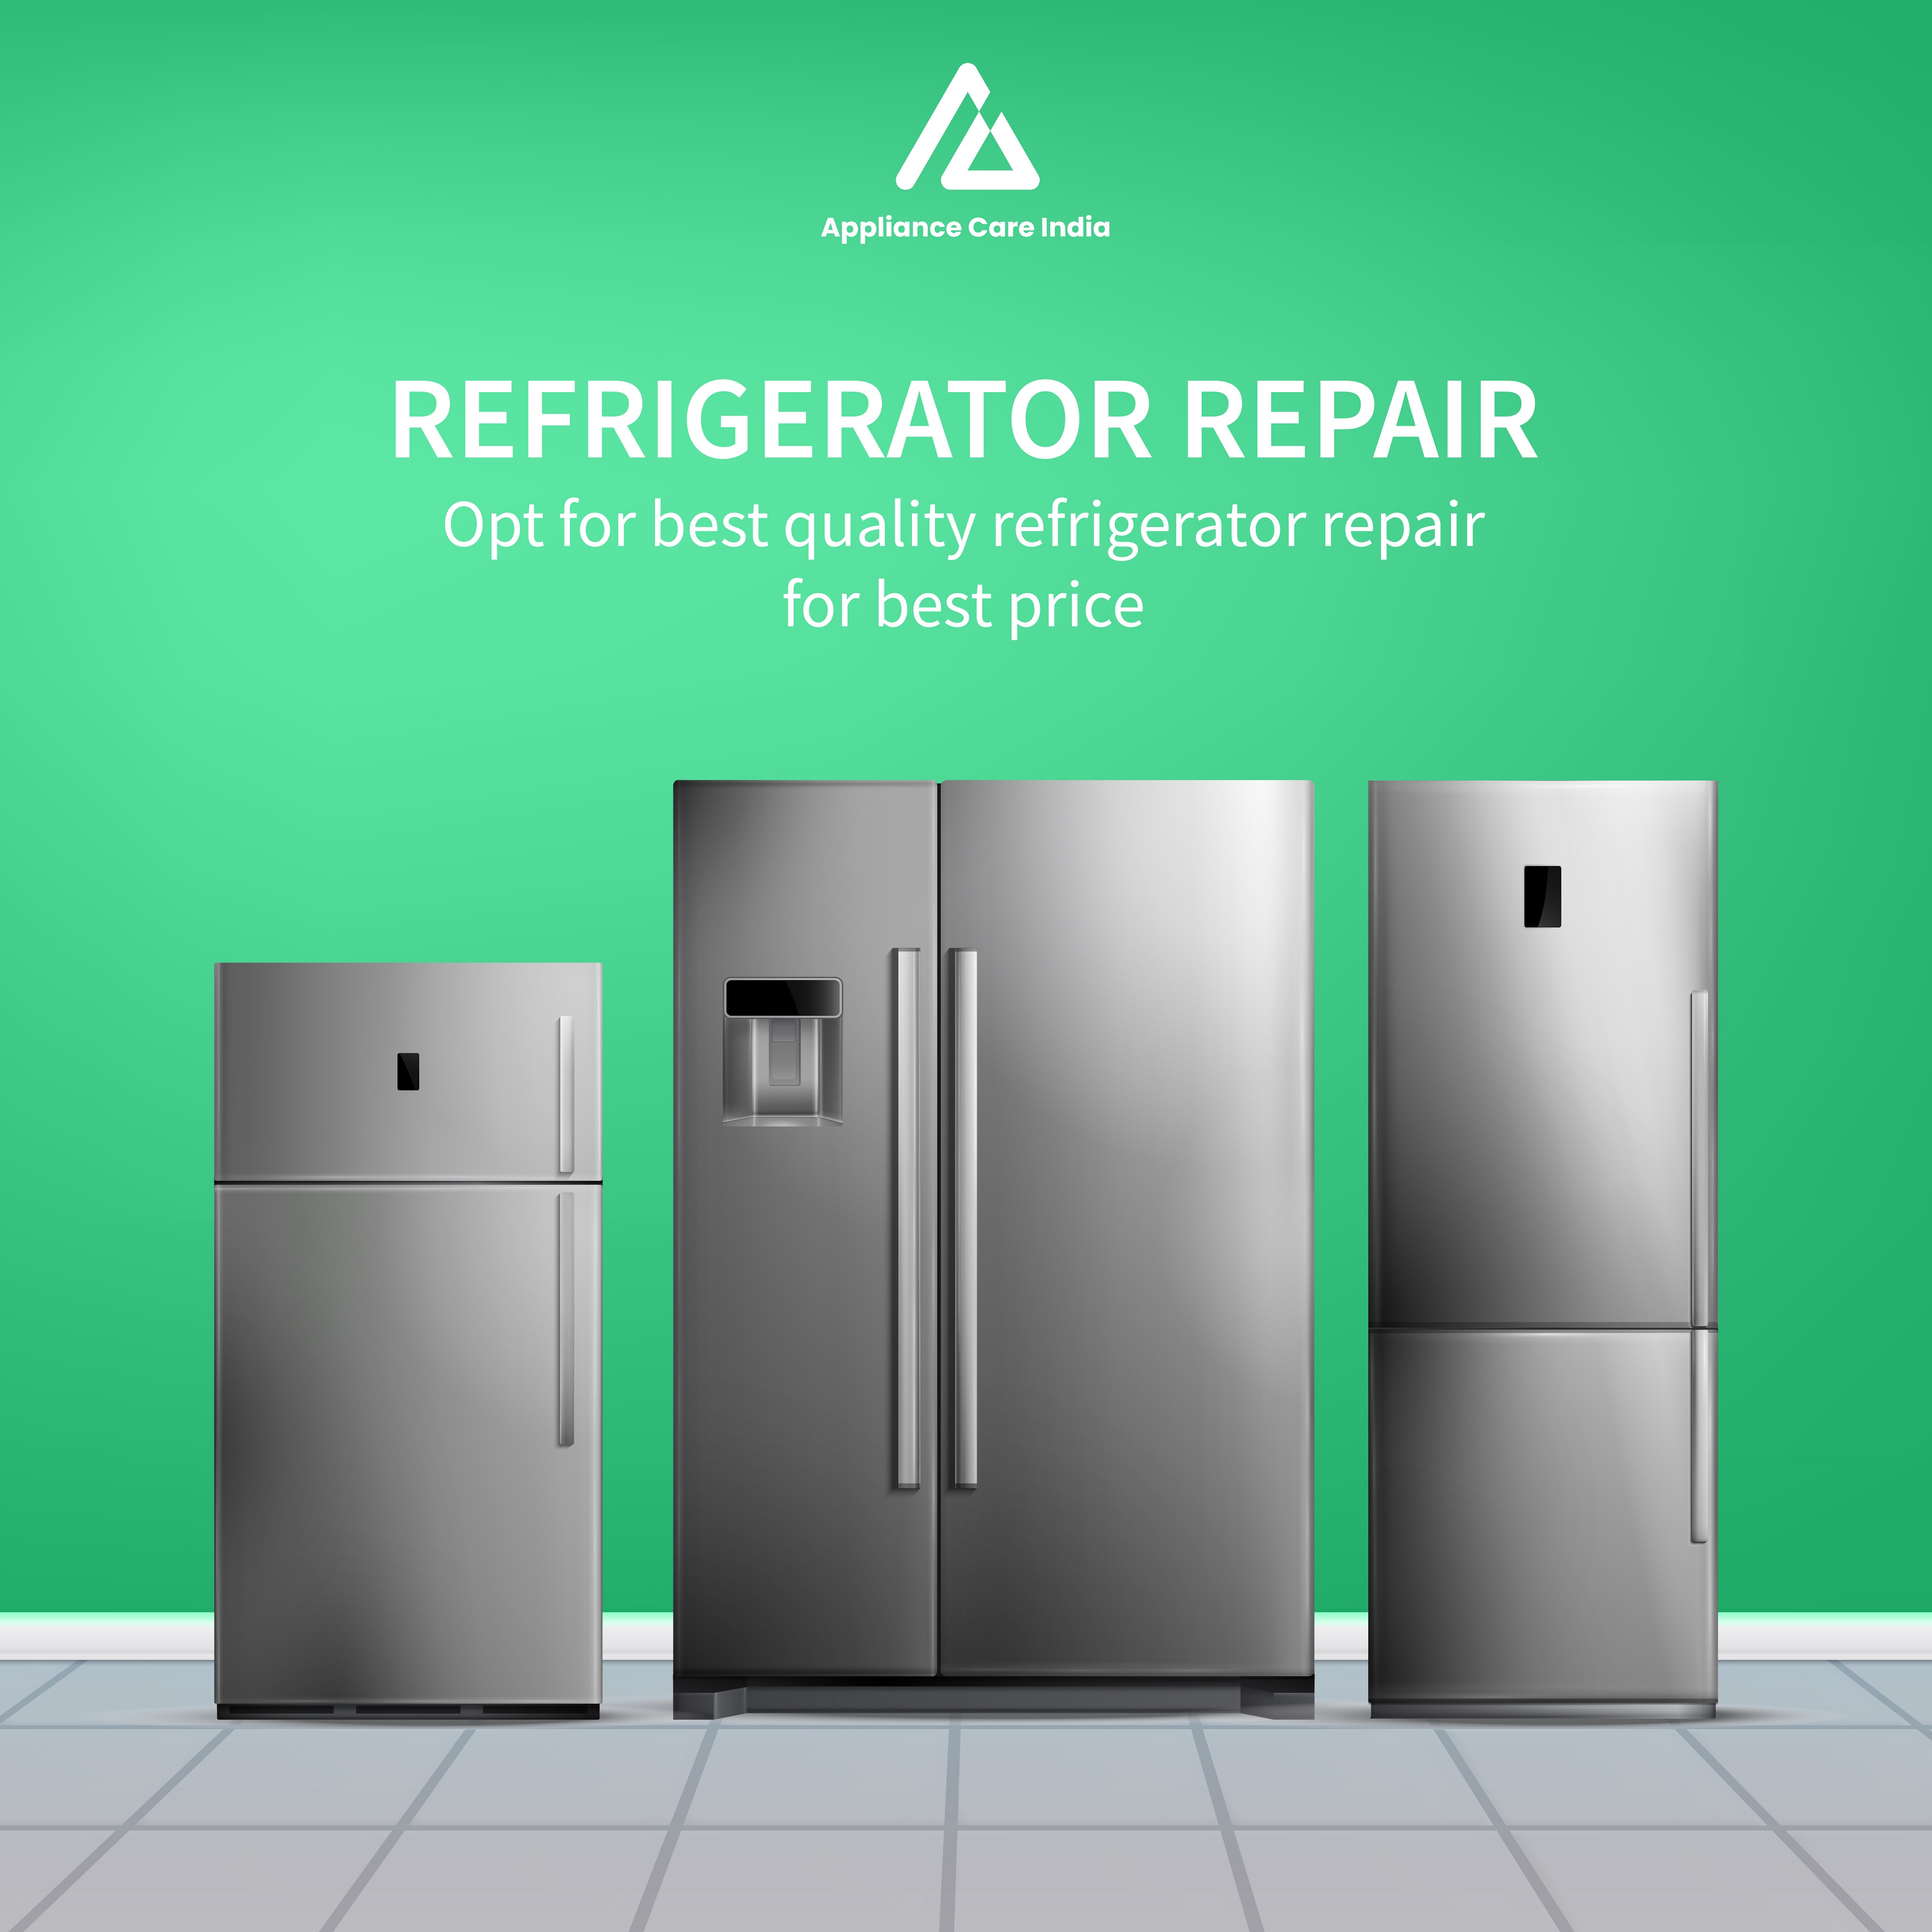 Refrigerator Repair from Appliance Care India